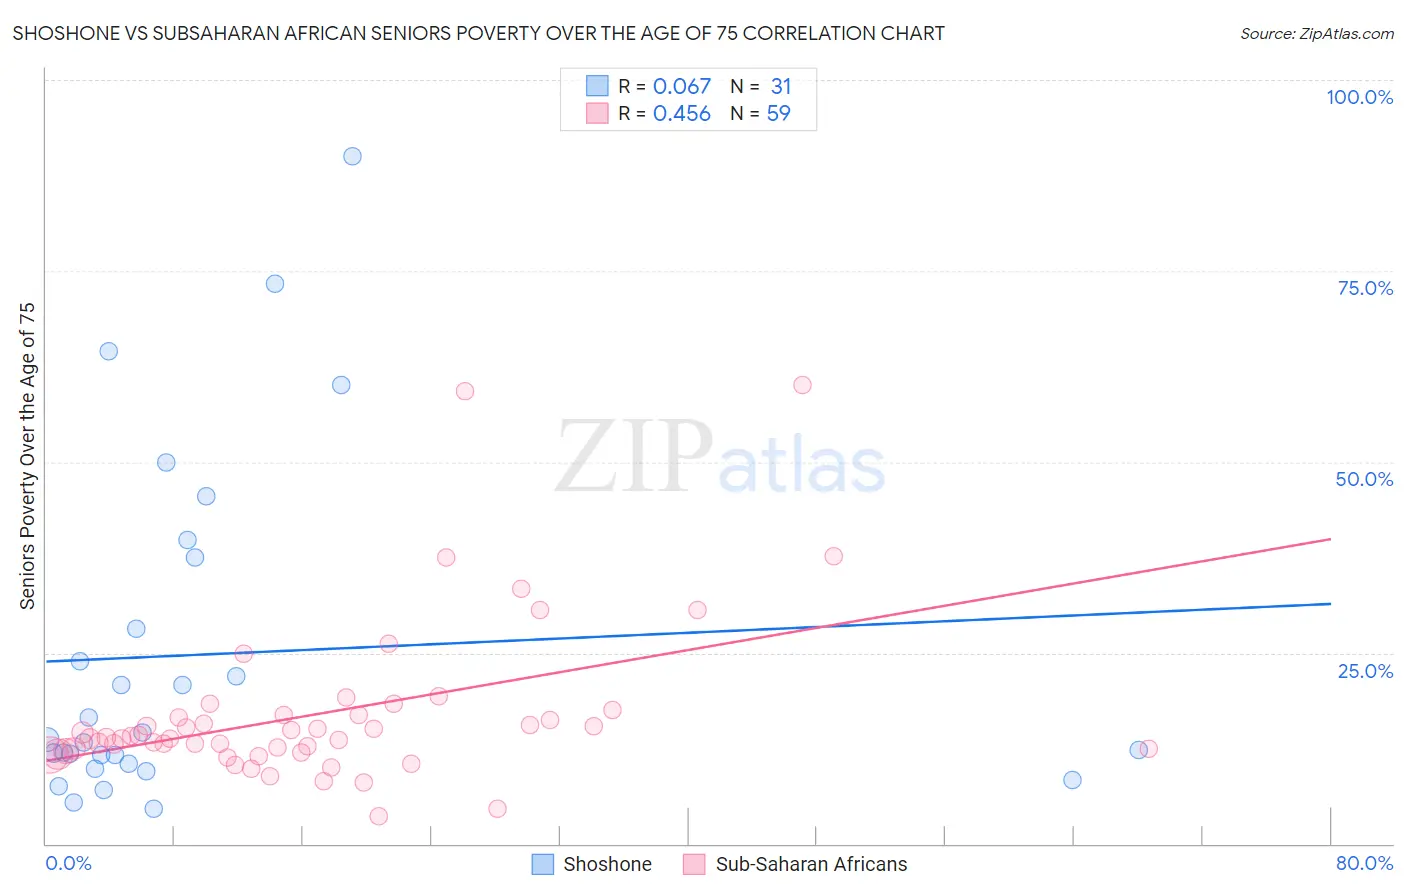 Shoshone vs Subsaharan African Seniors Poverty Over the Age of 75